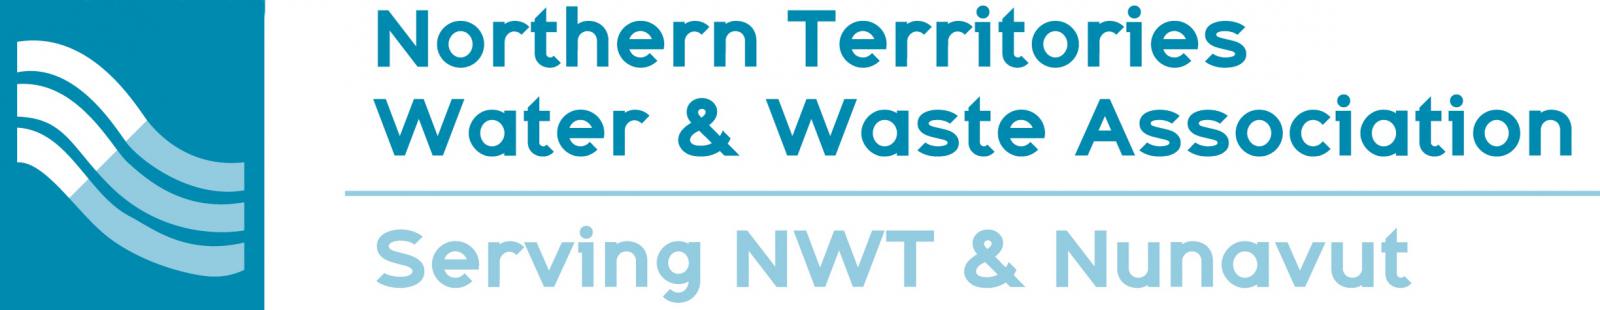 Northern Territories Water and Waste Association